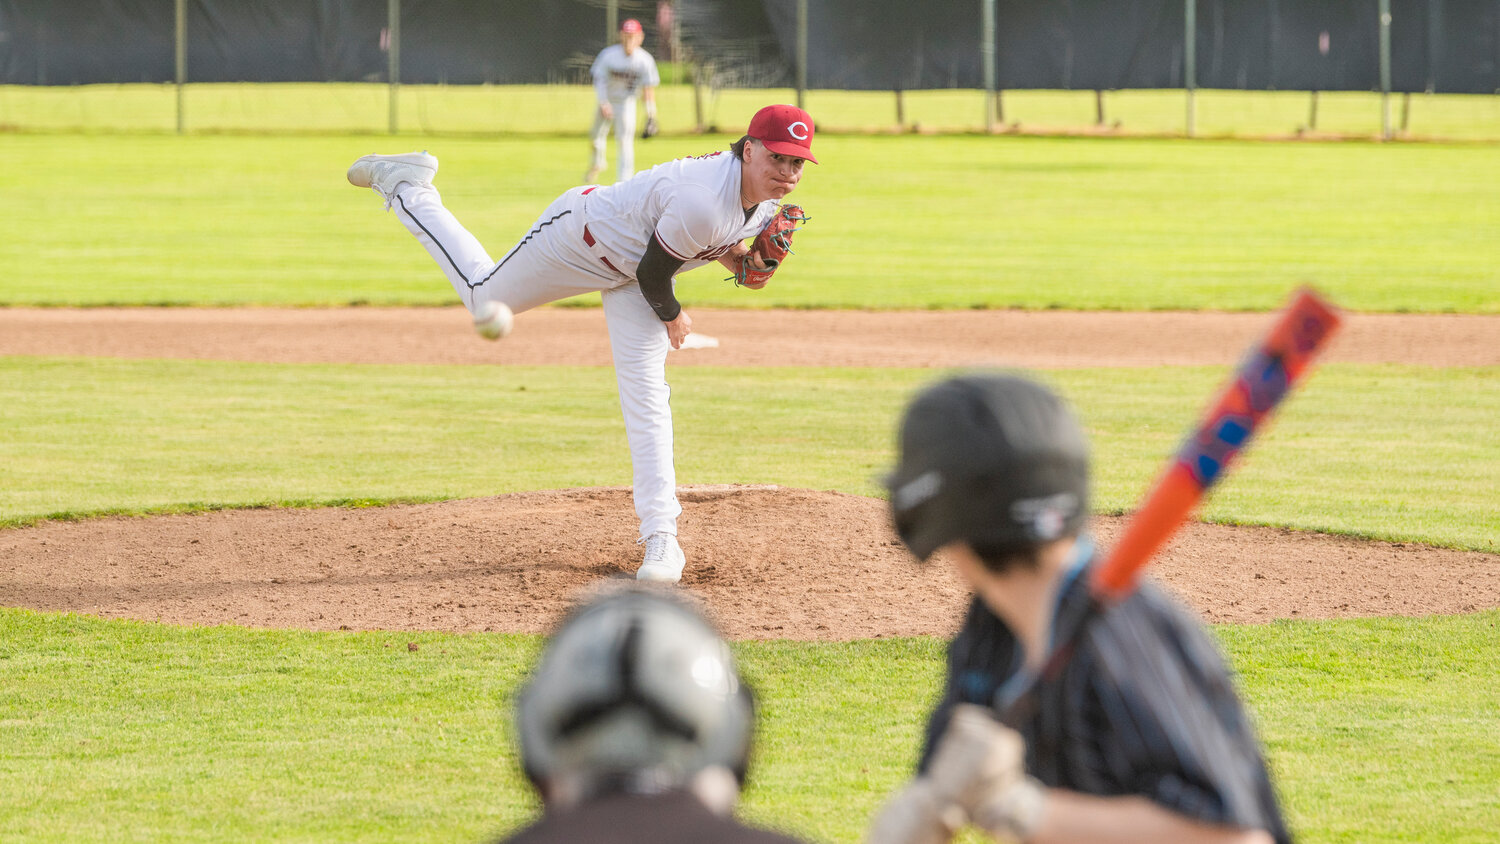 W.F. West’s Riggs Westlund (11) throws a pitch during a game against Mark Morris at Bearcat Stadium in Chehalis on Tuesday, May 9.